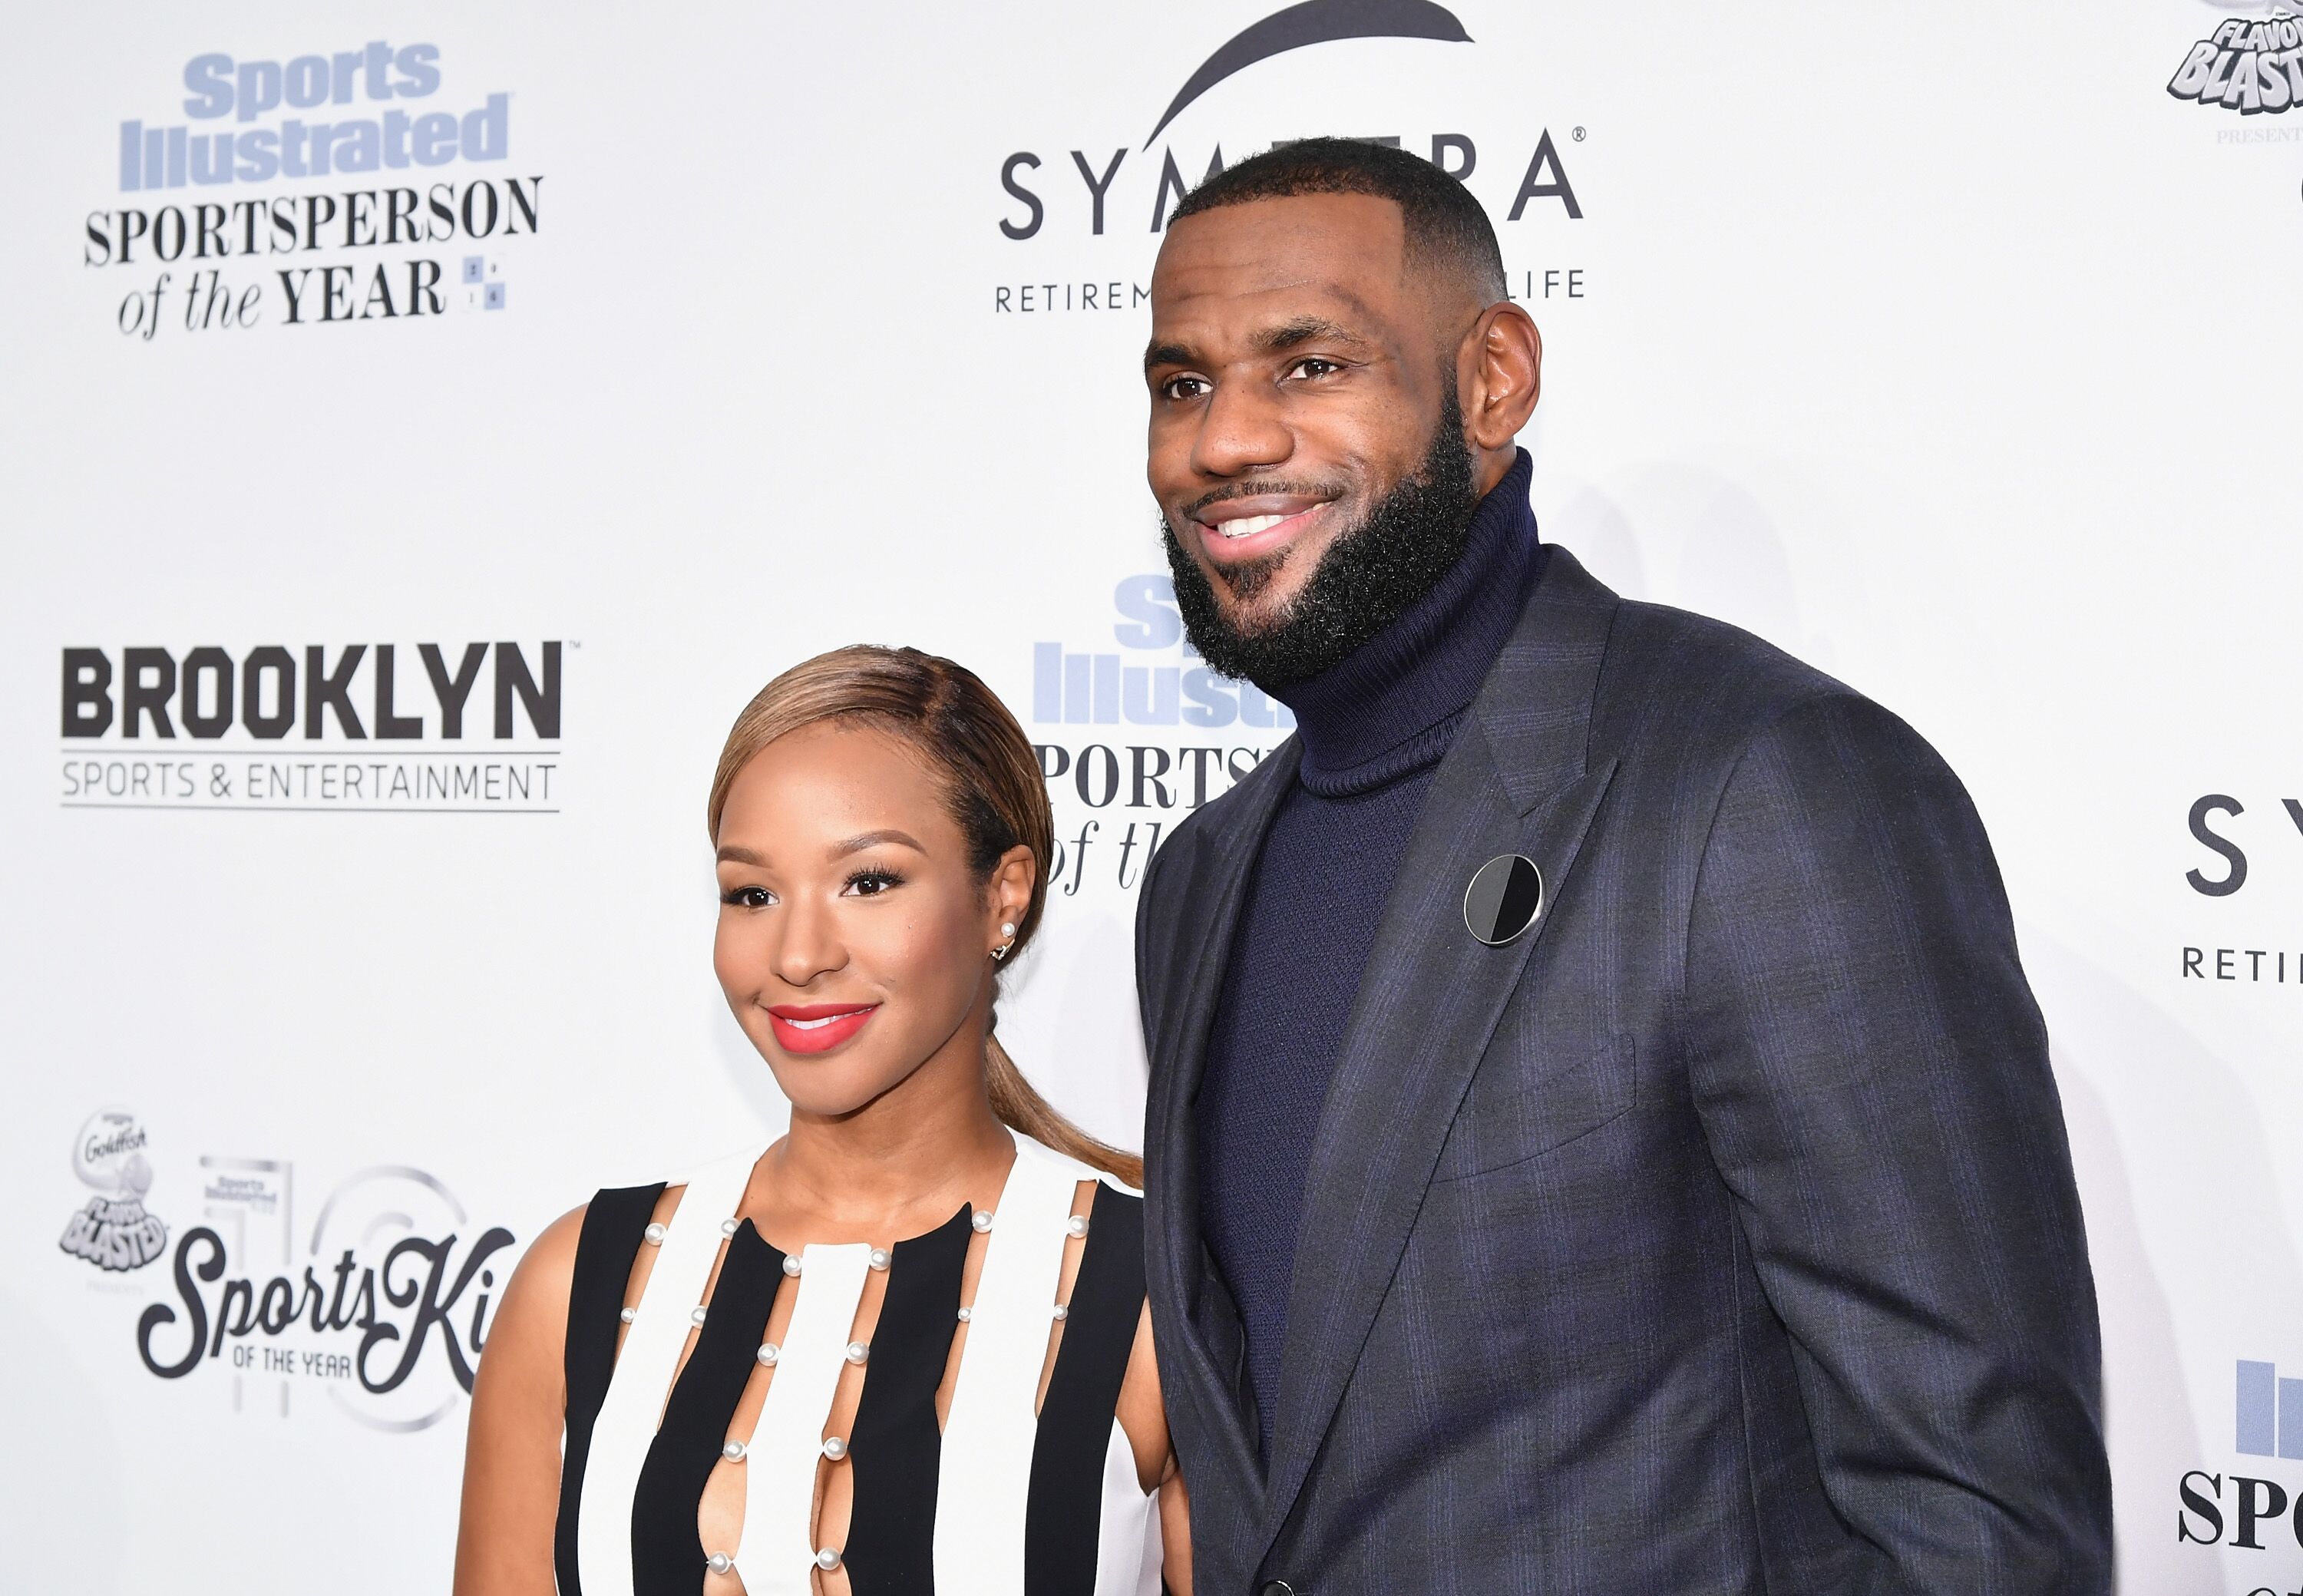 Savannah and LeBron James at the Sports Illustrated Sportsperson on the Year Awards/ Source: Getty Images